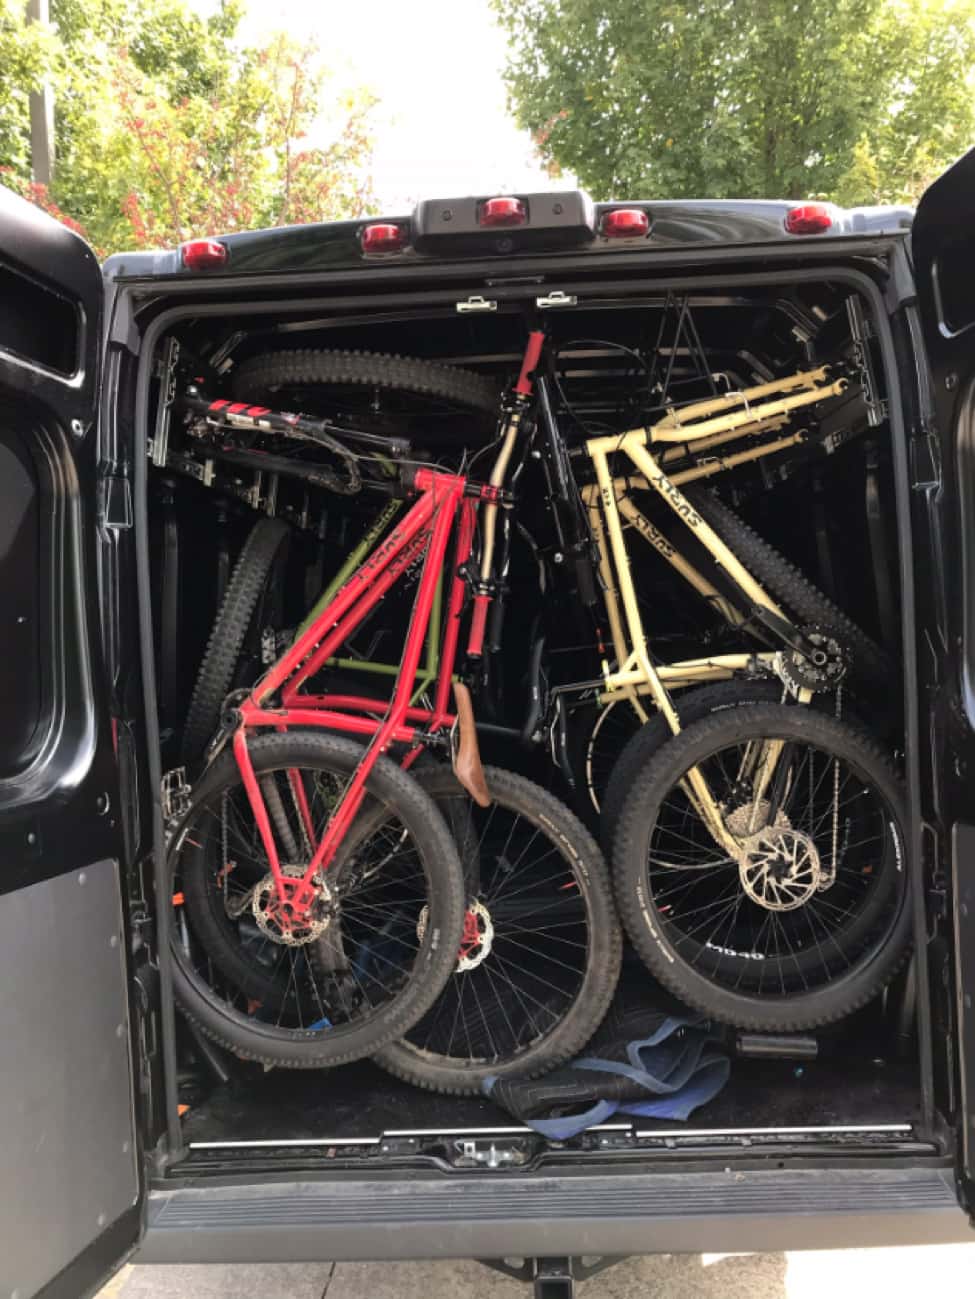 Rear view of a van with the rear doors open, showing Surly bikes packed in, seat to seat, from top to bottom